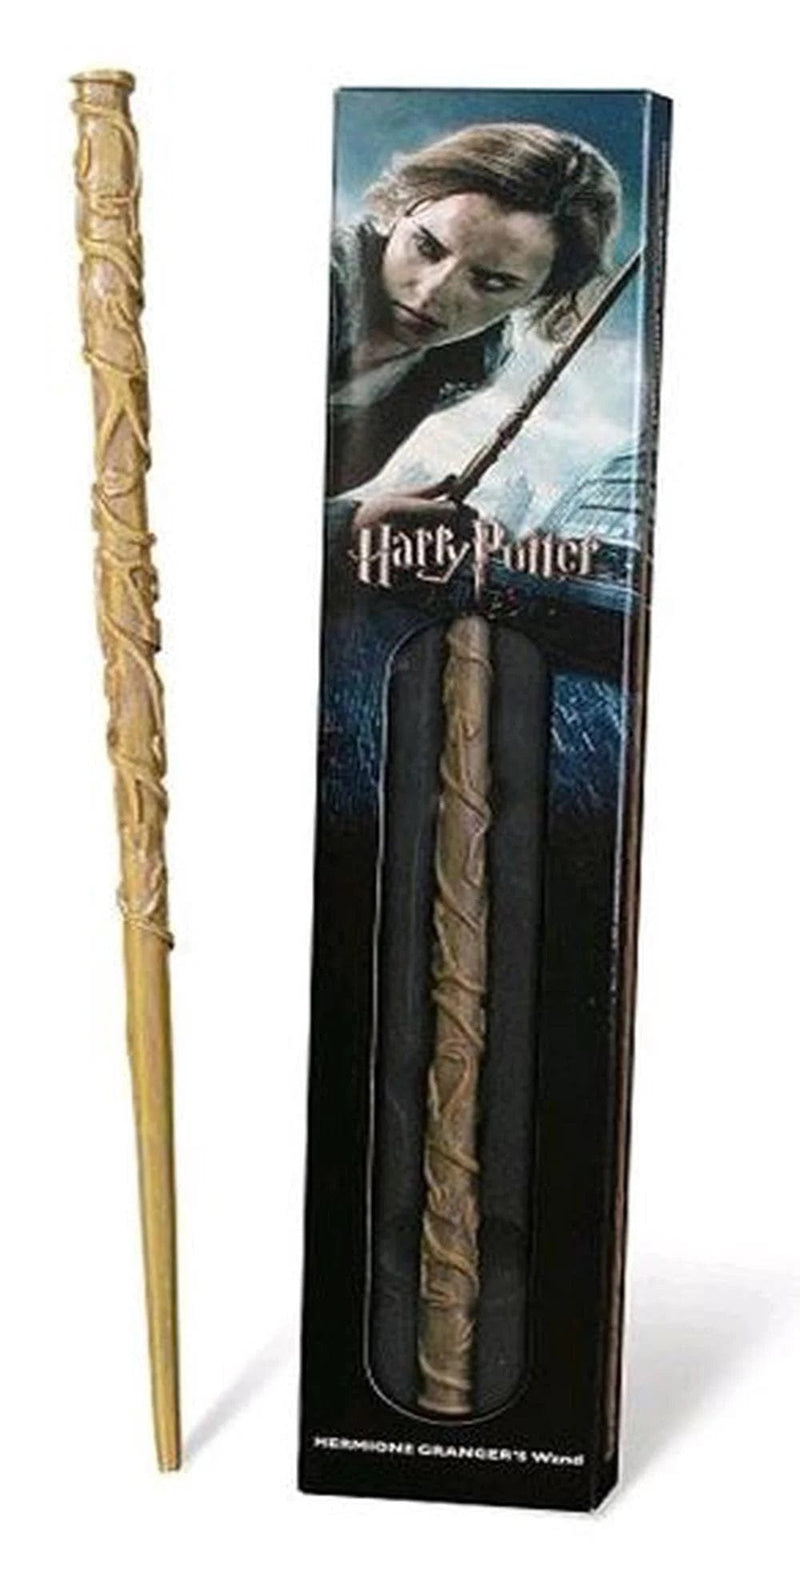 NOBLE COLLECTION - HARRY POTTER - WANDS - HERMIONE GRANGER’S PALICA 812370010554